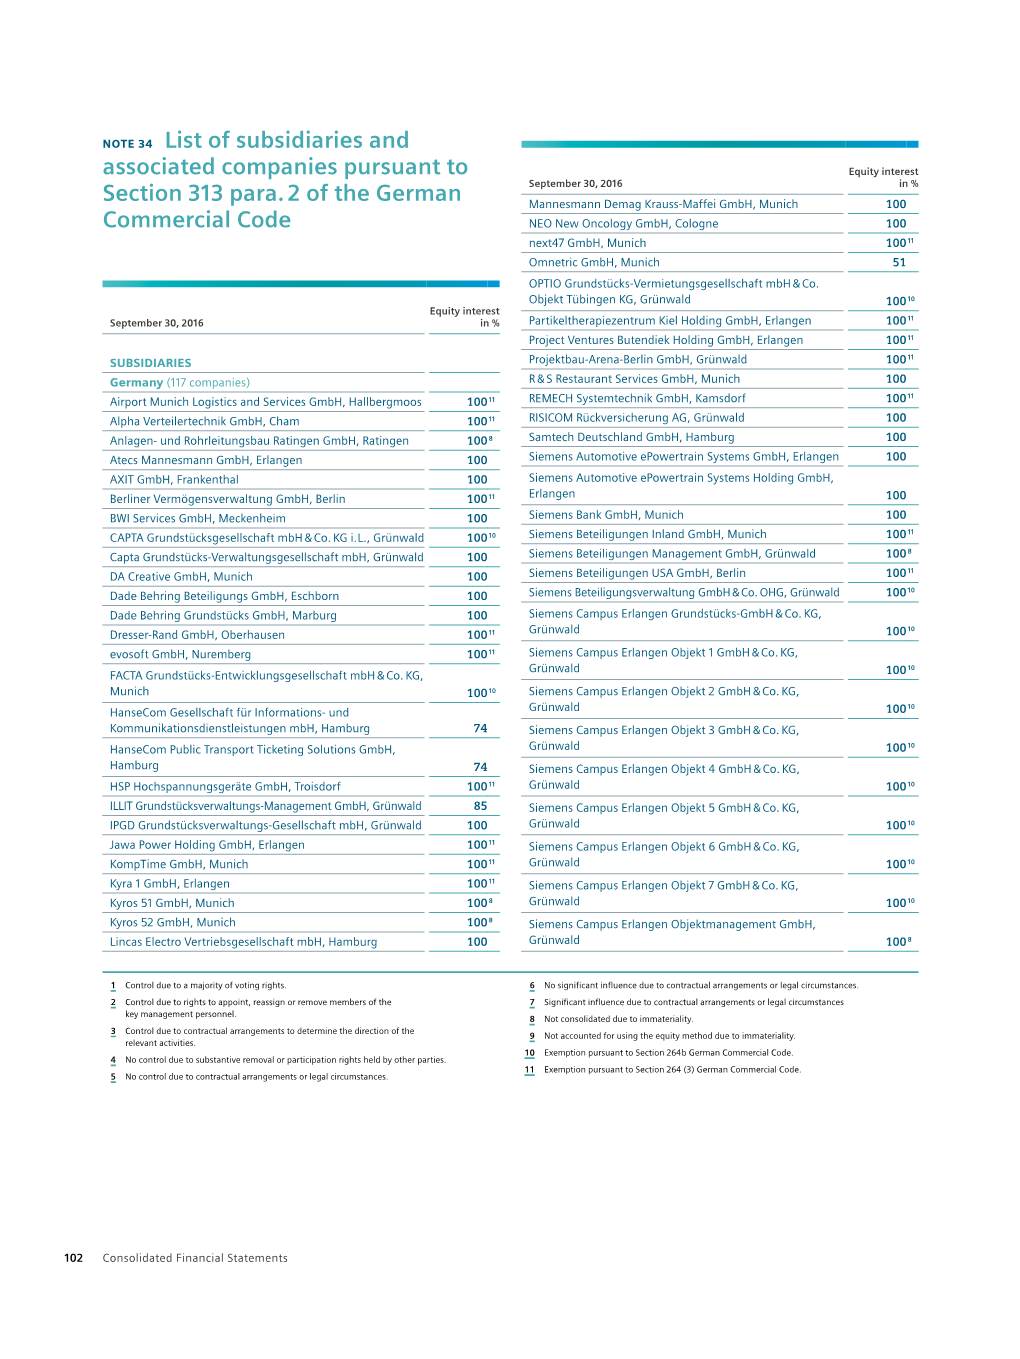 Siemens Annual Report 2016, List of Subsidiaries and Associated